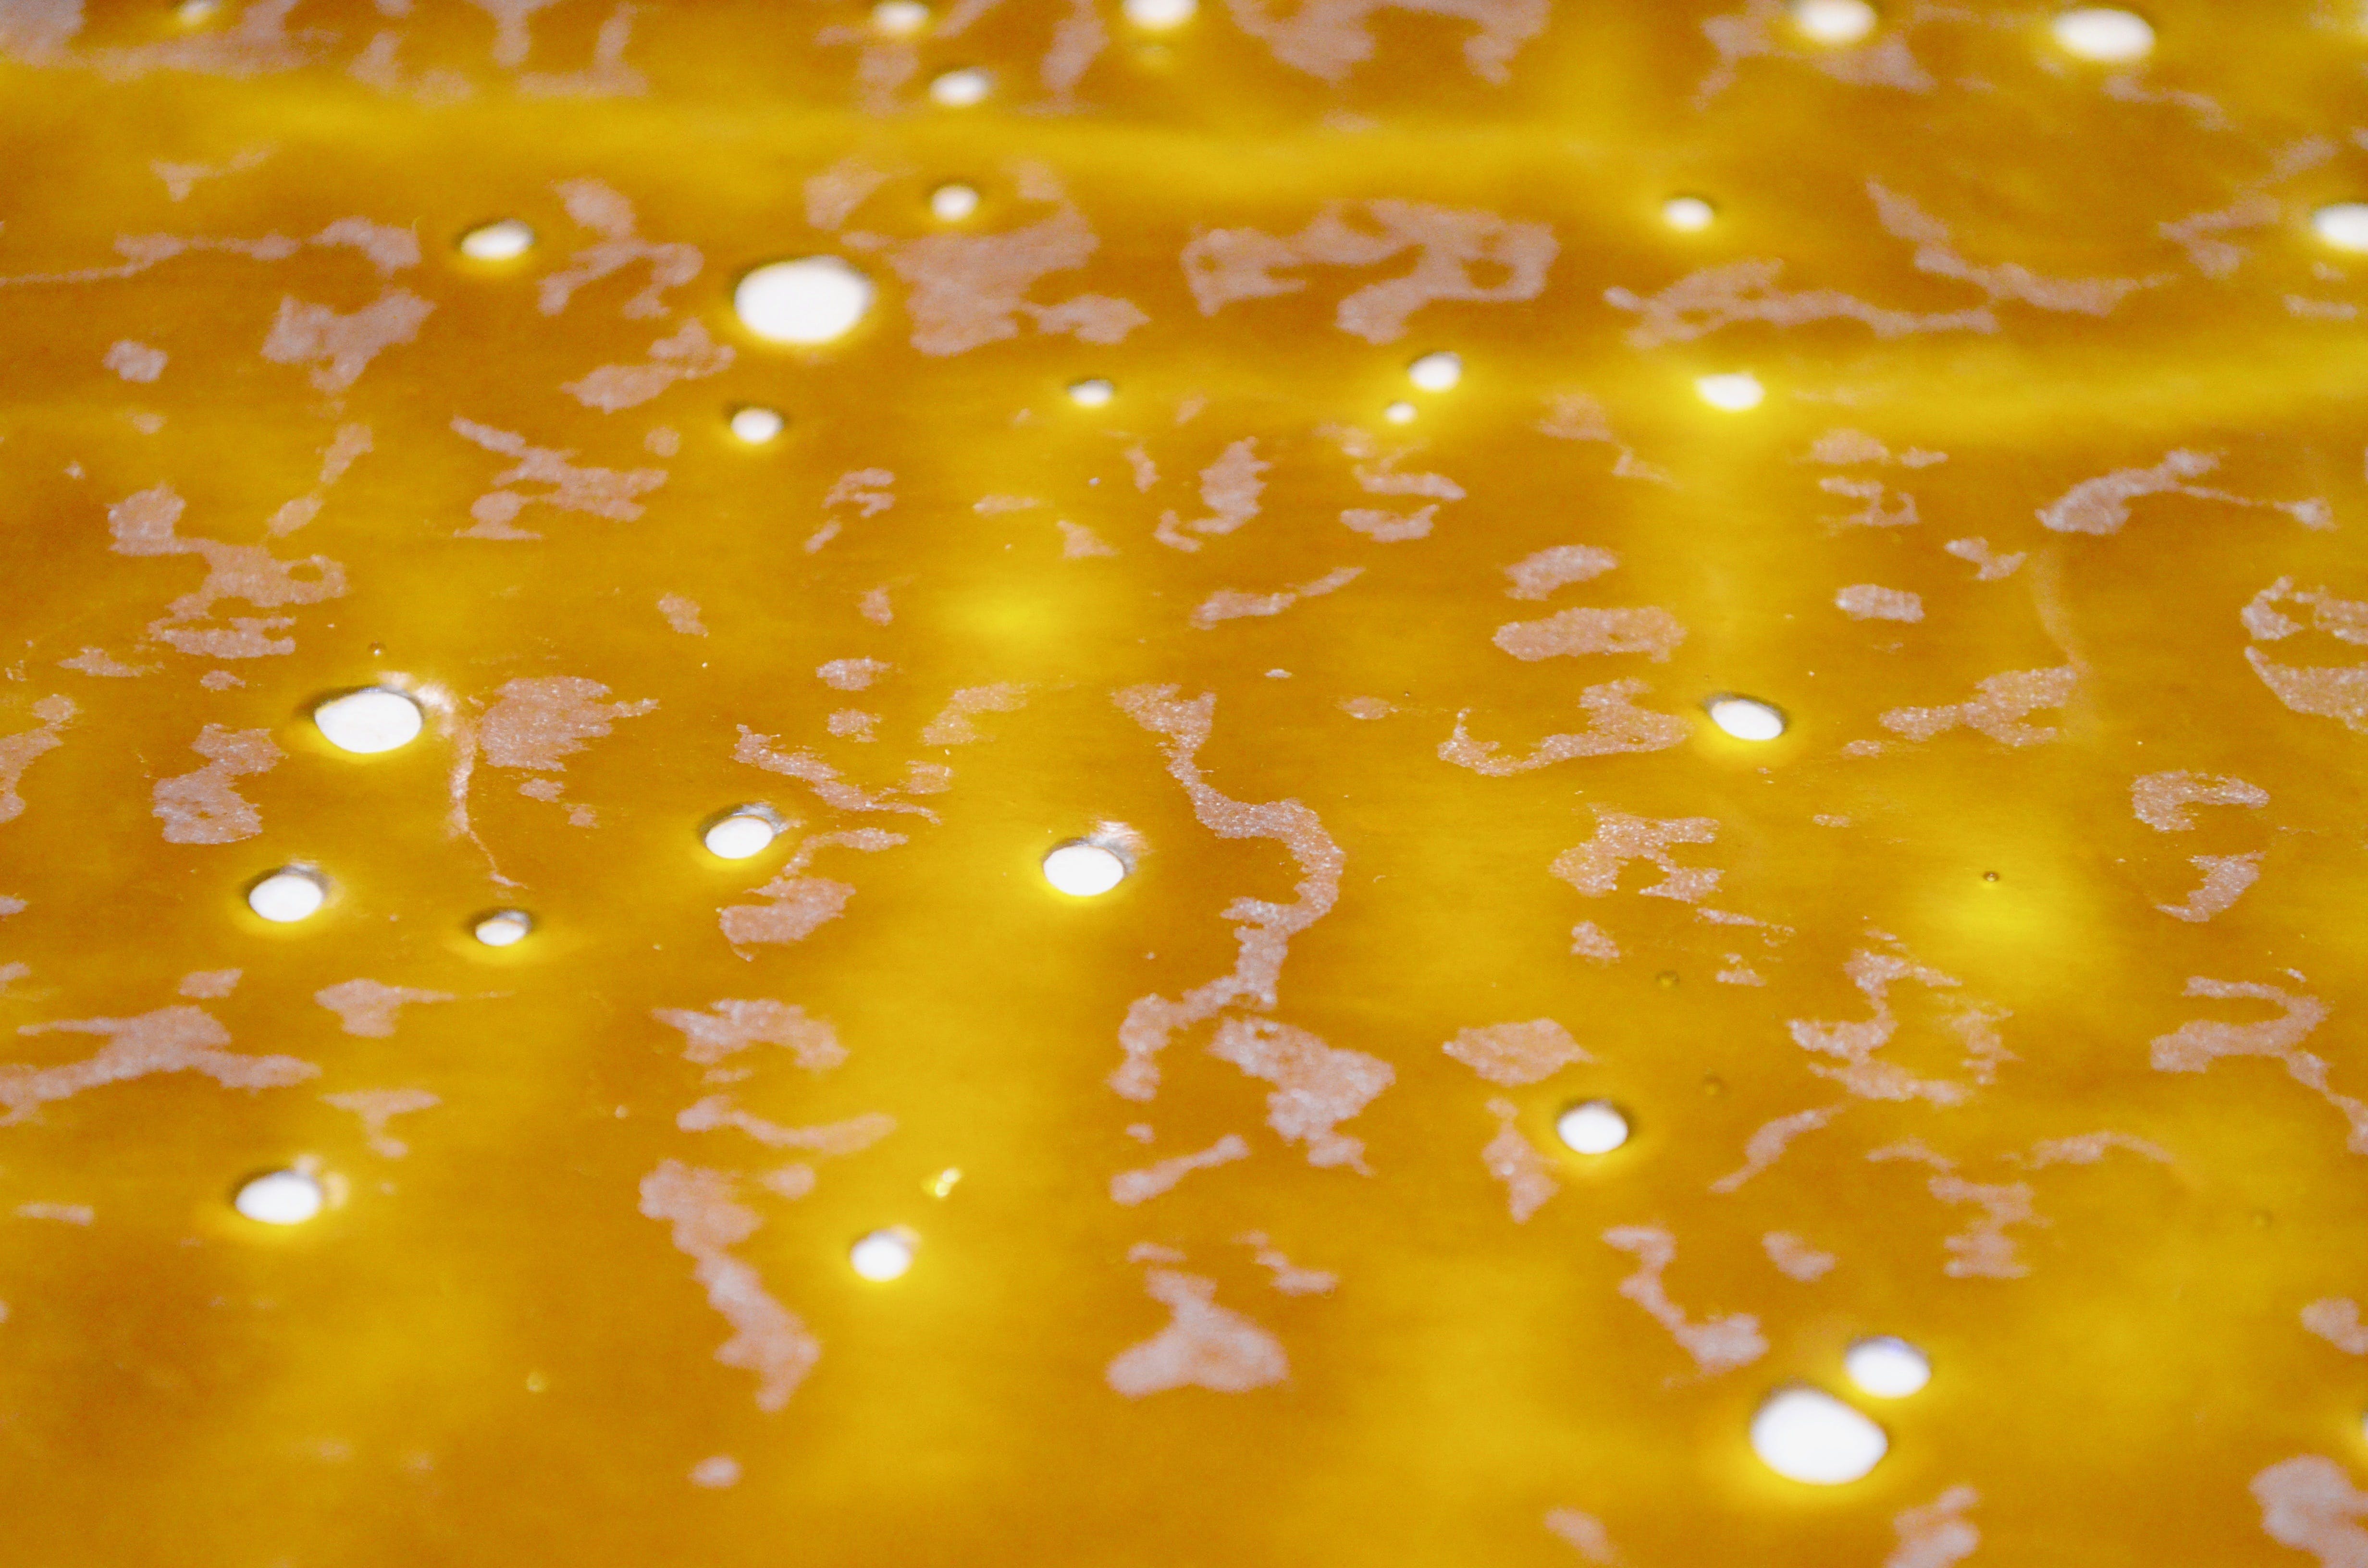 concentrate-power-plant-shatter-1g